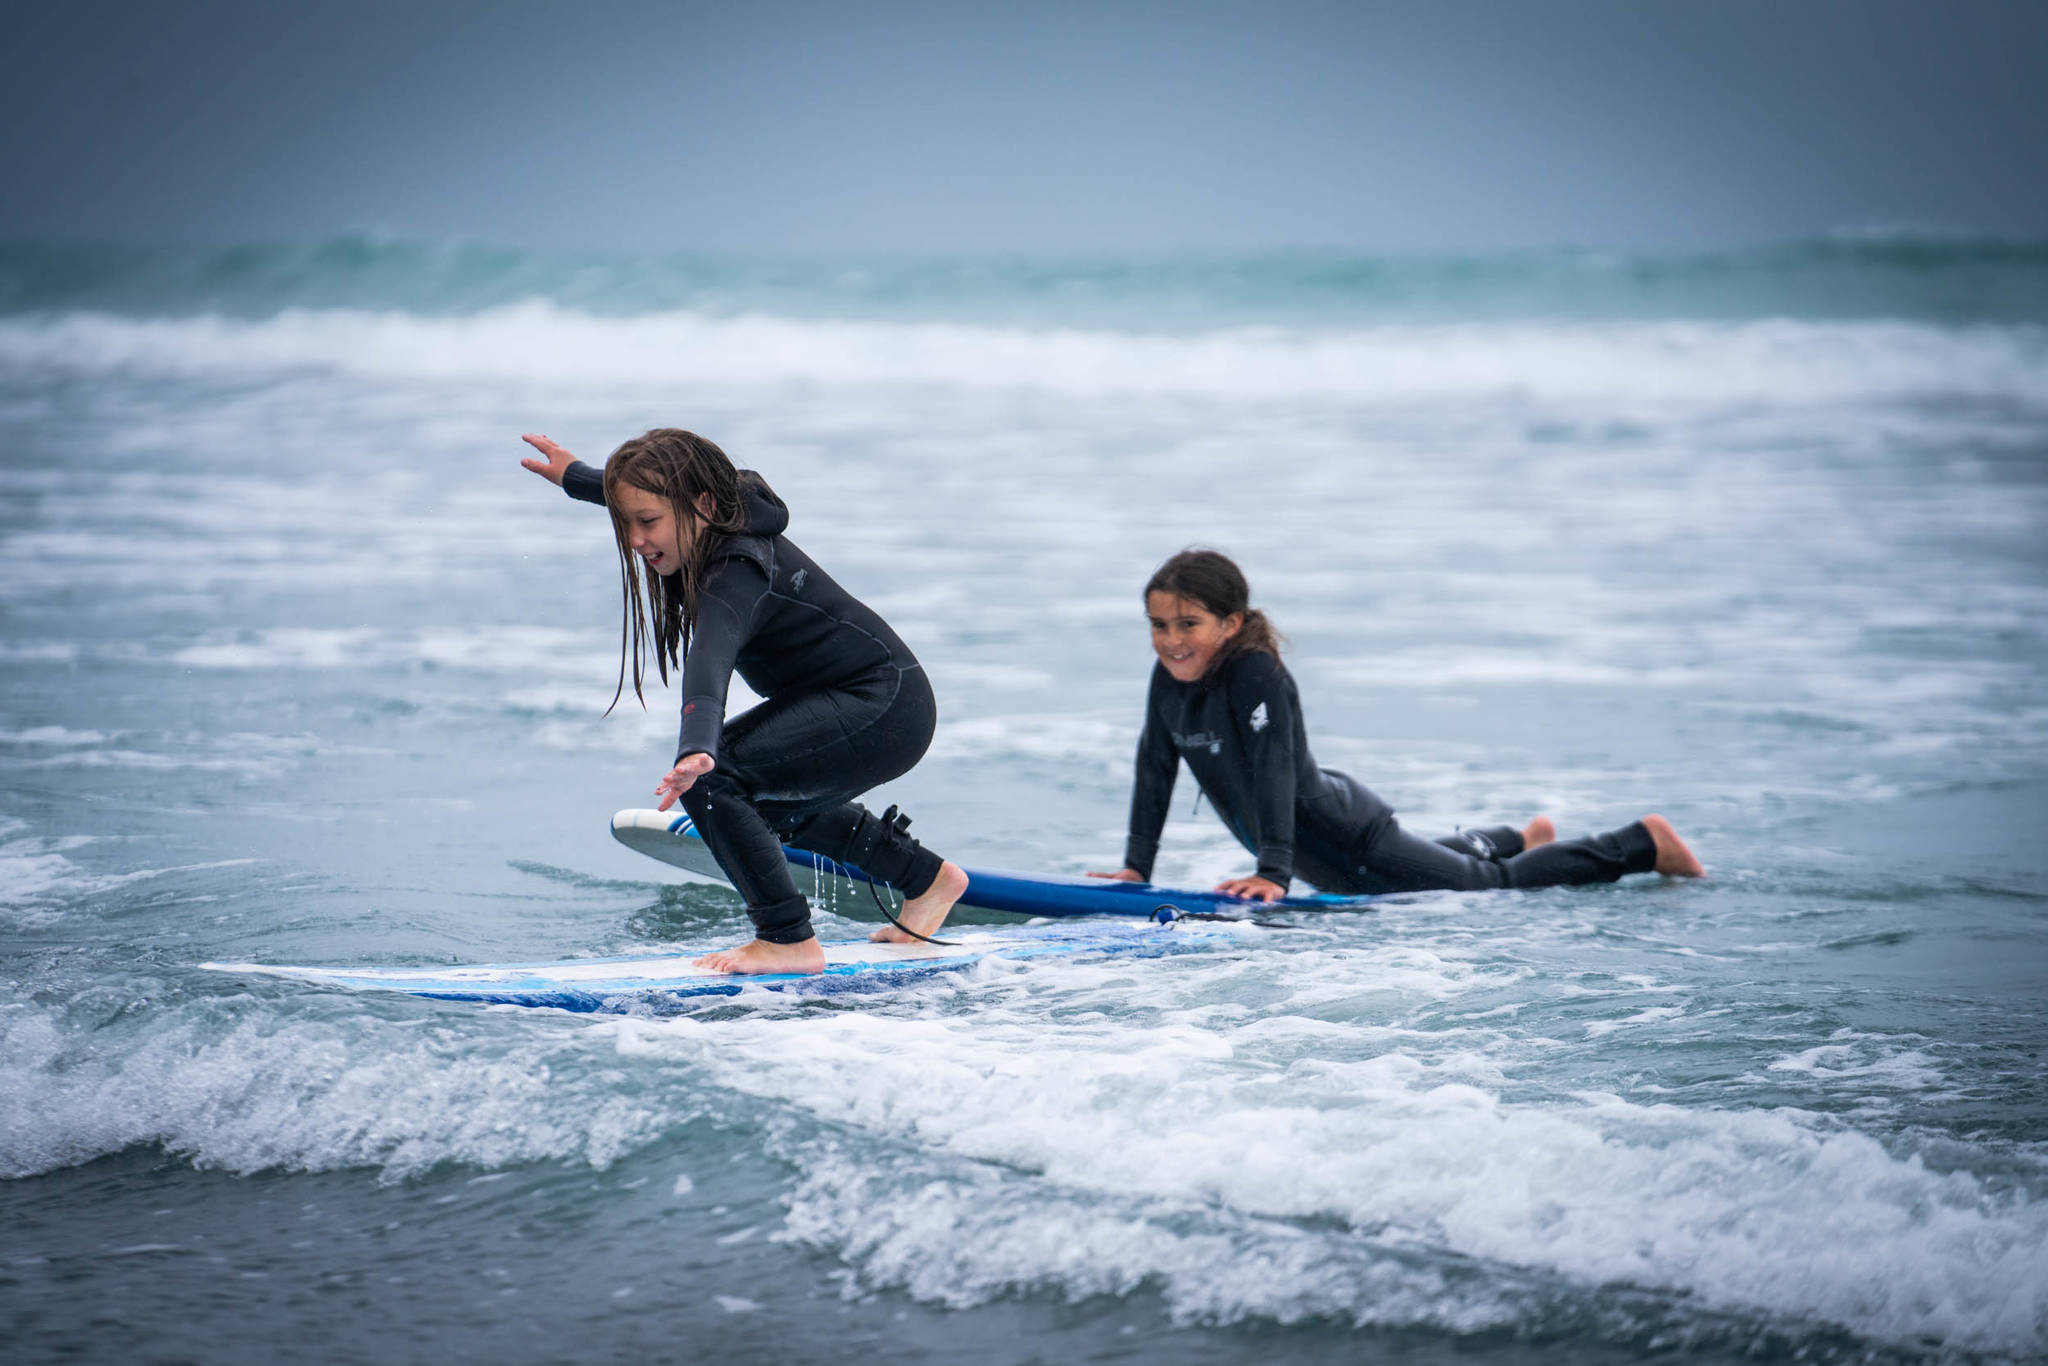 Yakutat Surf Club participants practice their form during the kickoff July camp. Standing up on a surfboard is difficult, and youth participants worked hard to challenge themselves during the week-long event. (Courtesy Photo / Bethany Sonsini Goodrich)